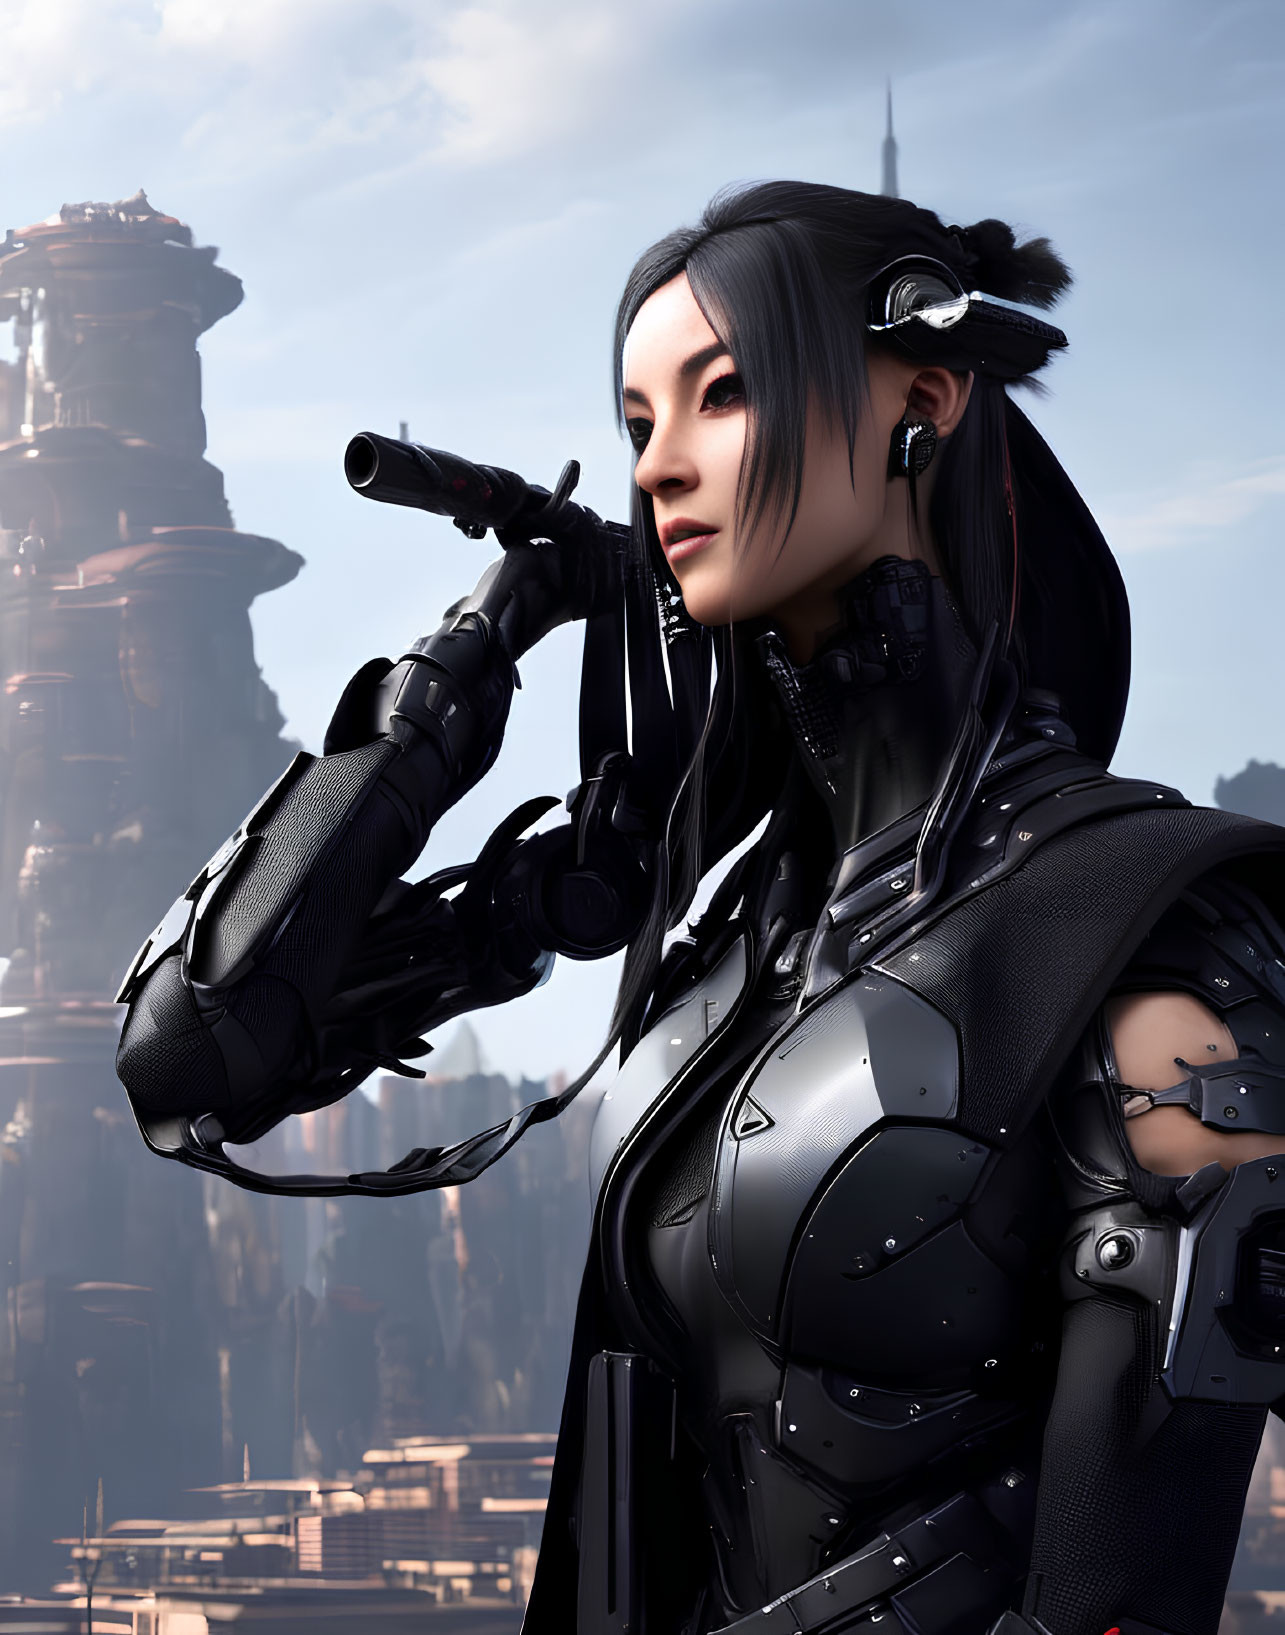 Futuristic female warrior in black armor with cybernetic arm and sniper rifle in high-tech city